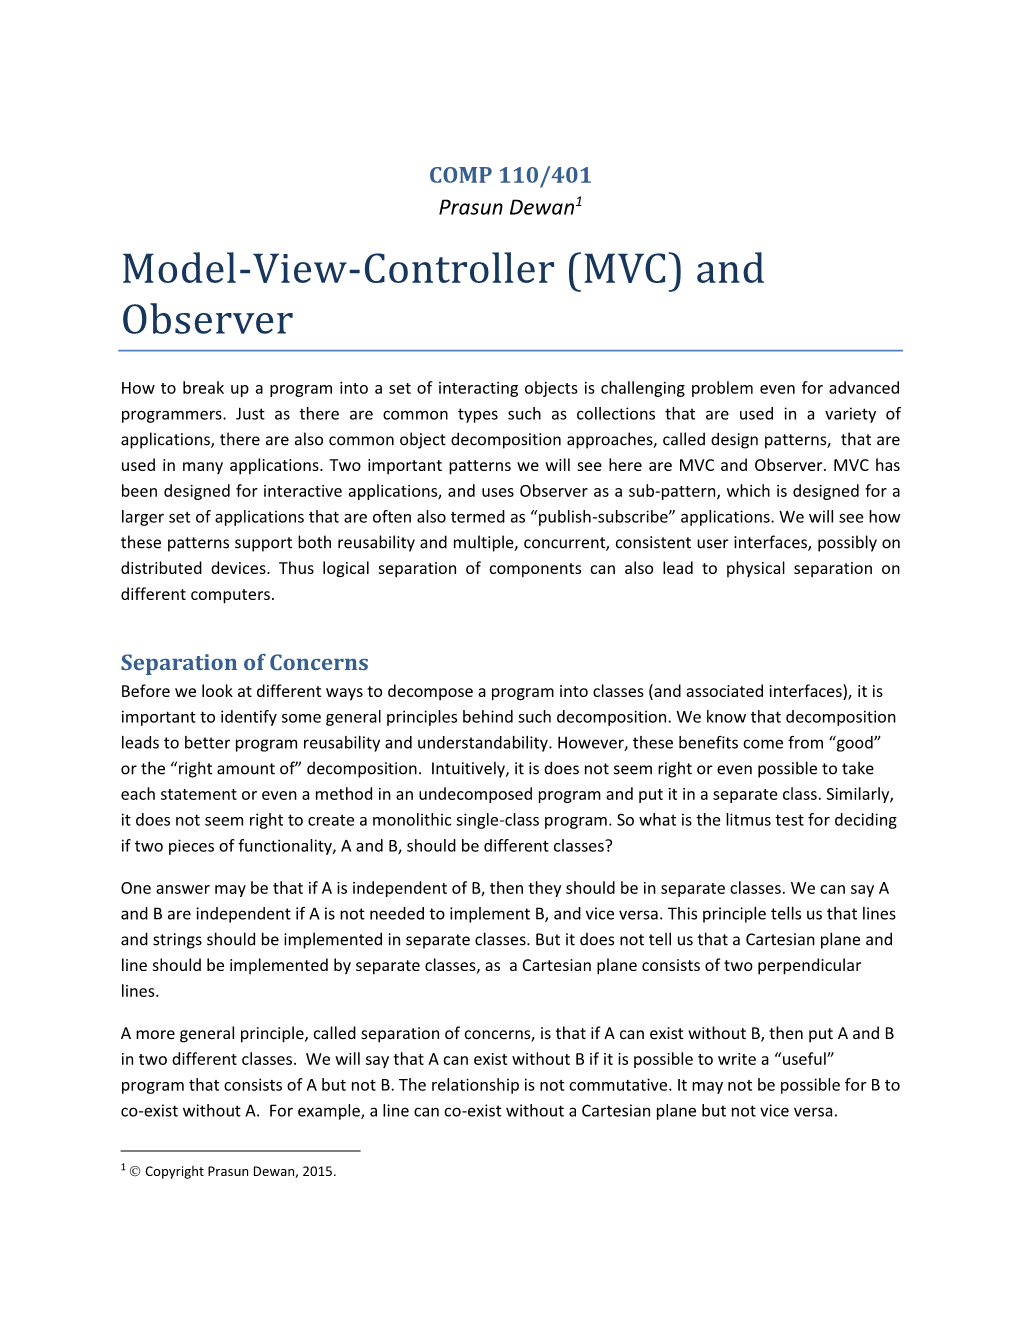 Model-View-Controller (MVC) and Observer